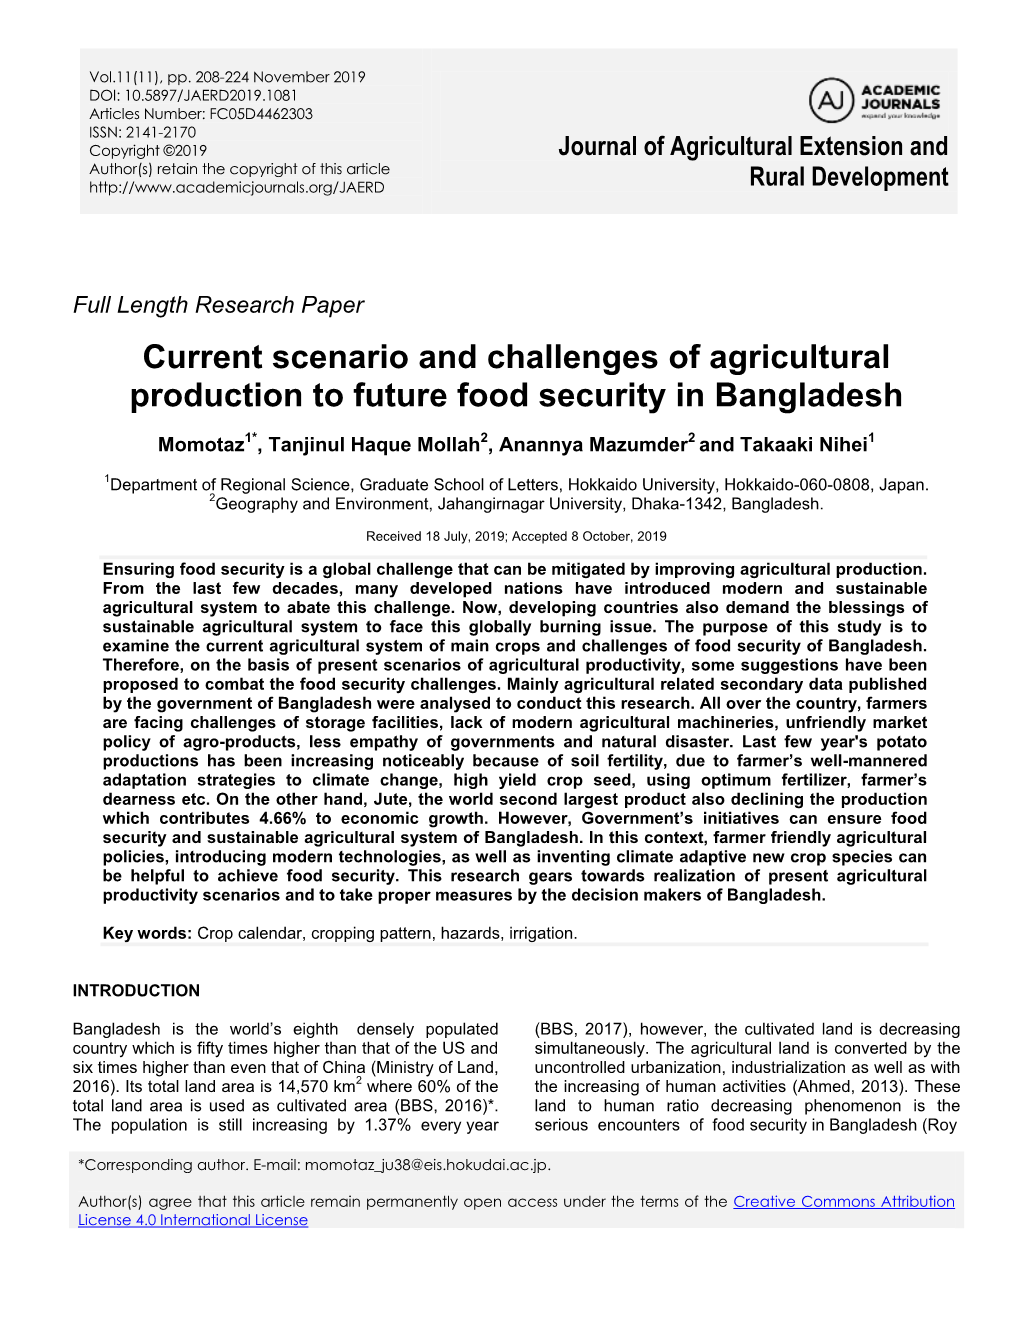 Current Scenario and Challenges of Agricultural Production to Future Food Security in Bangladesh